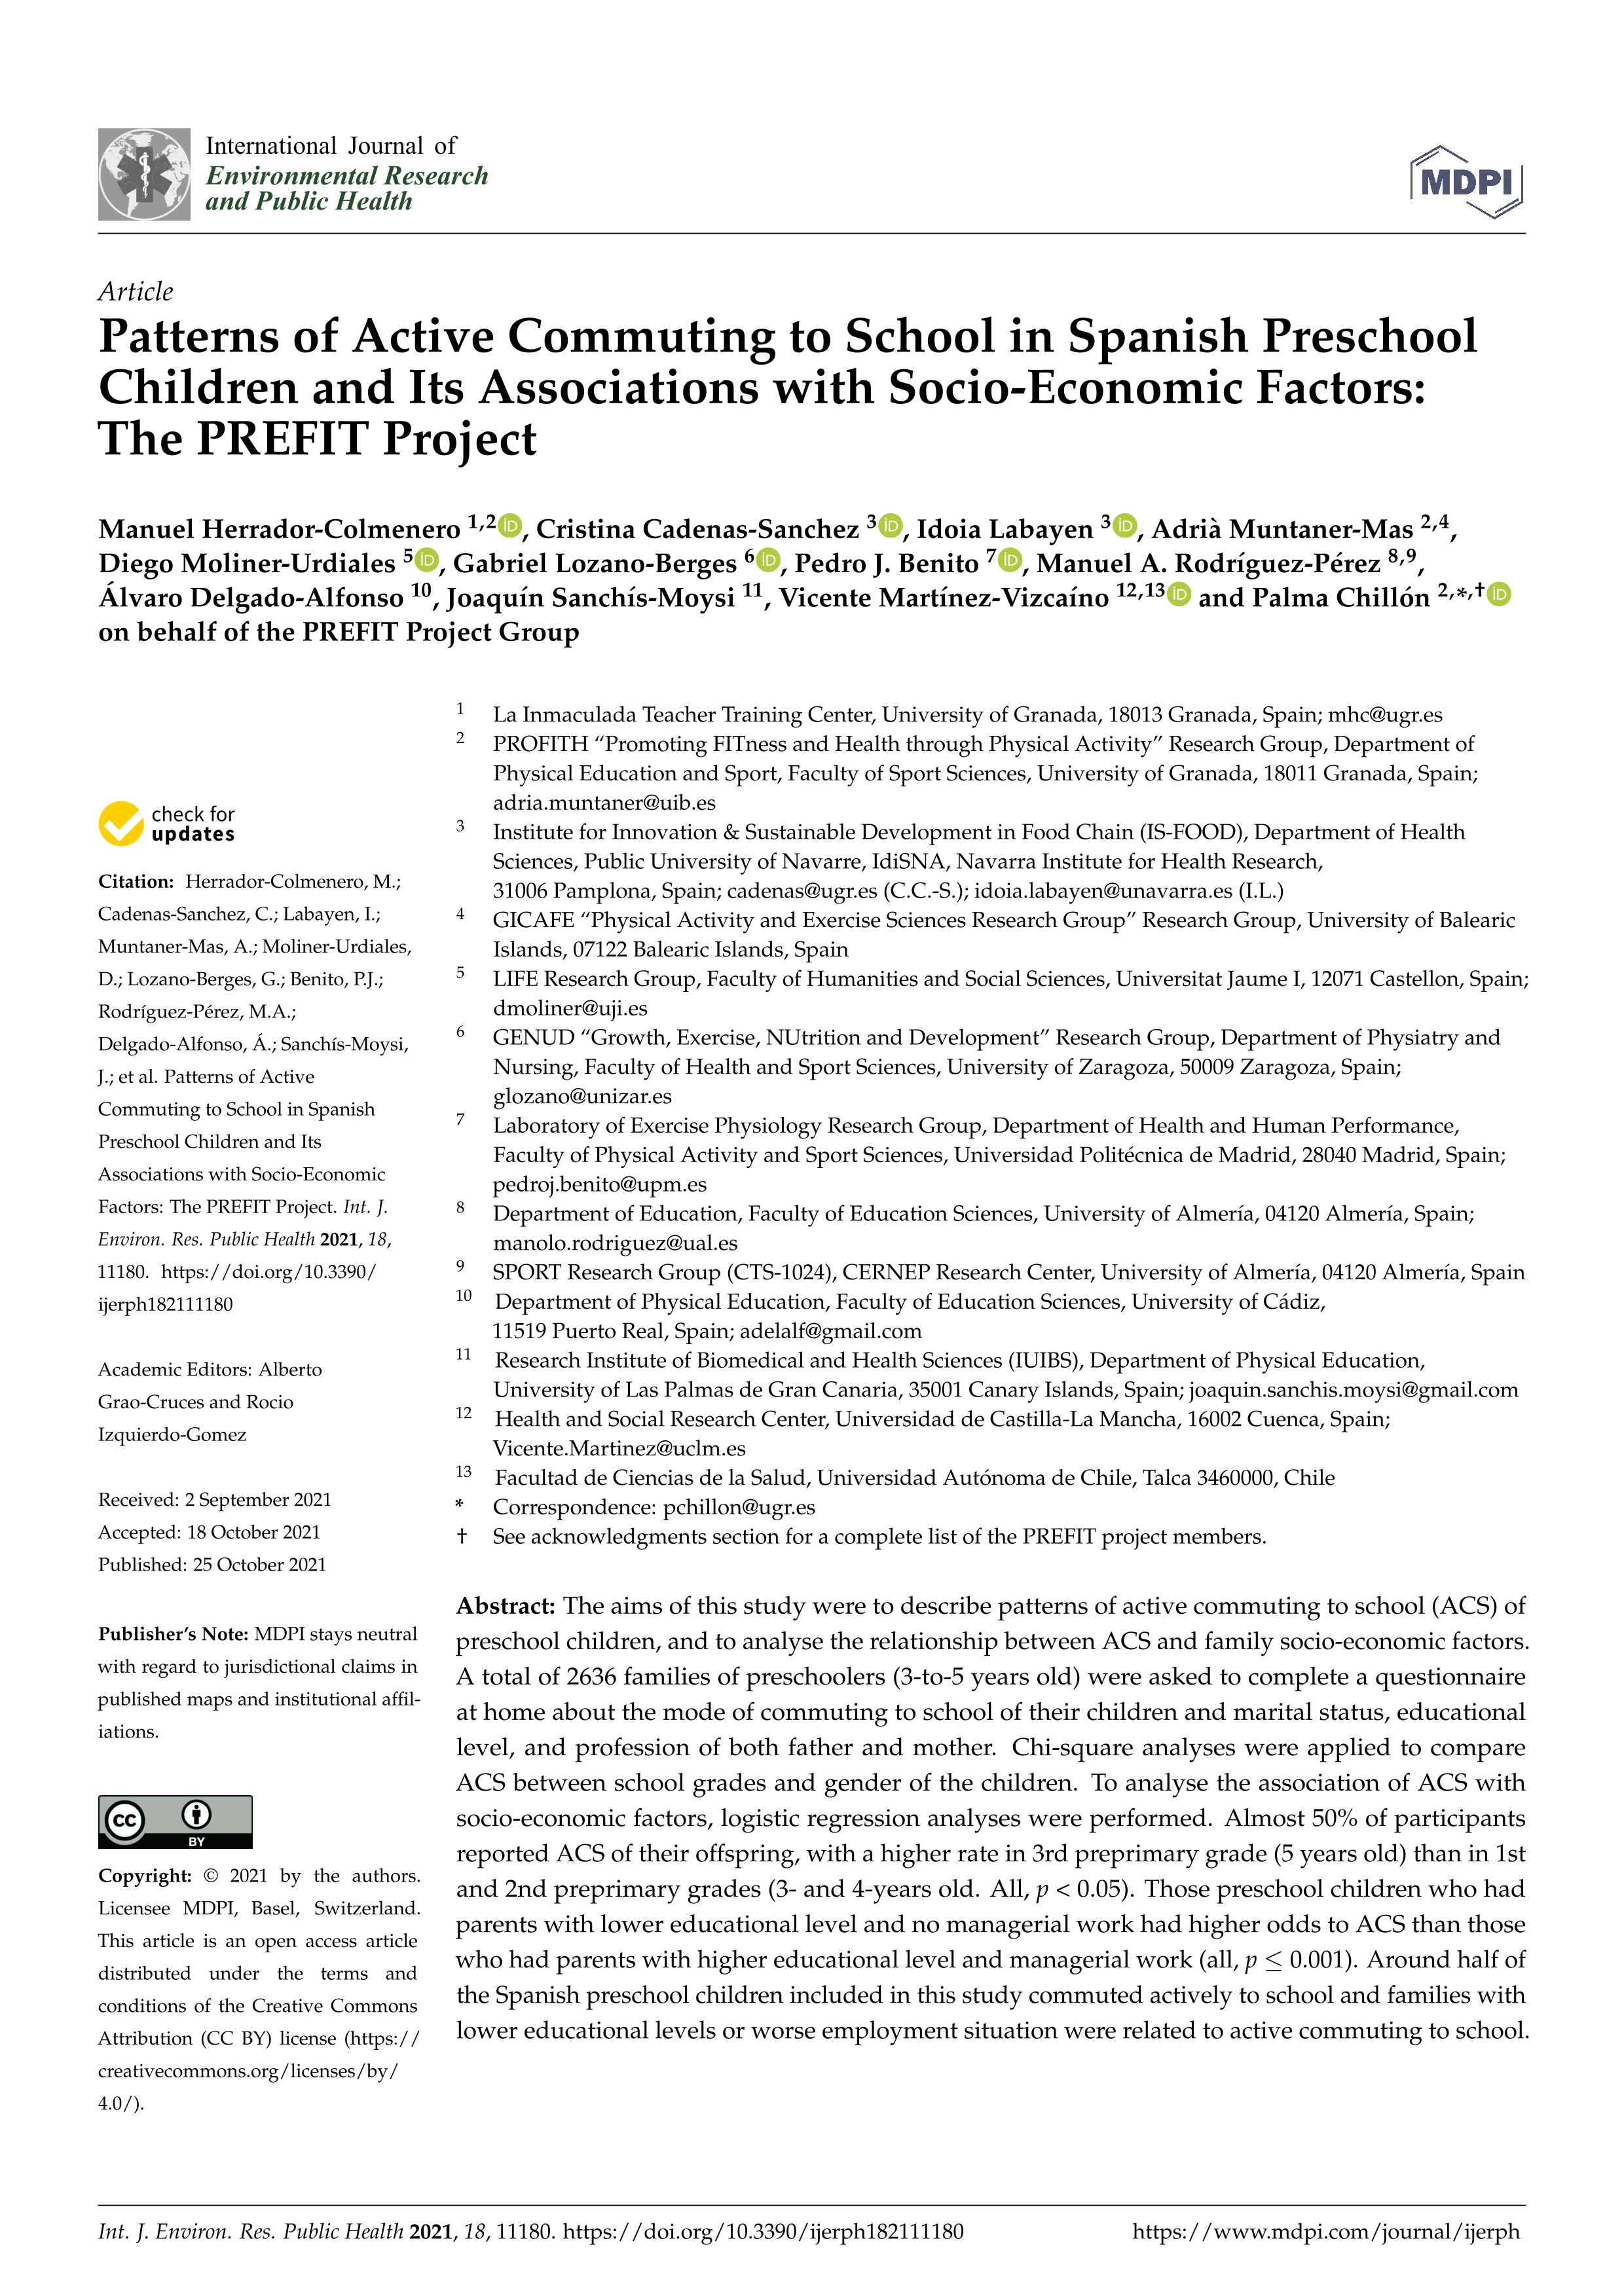 Patterns of Active Commuting to School in Spanish Preschool Children and Its Associations with Socio-Economic Factors: The PREFIT Project